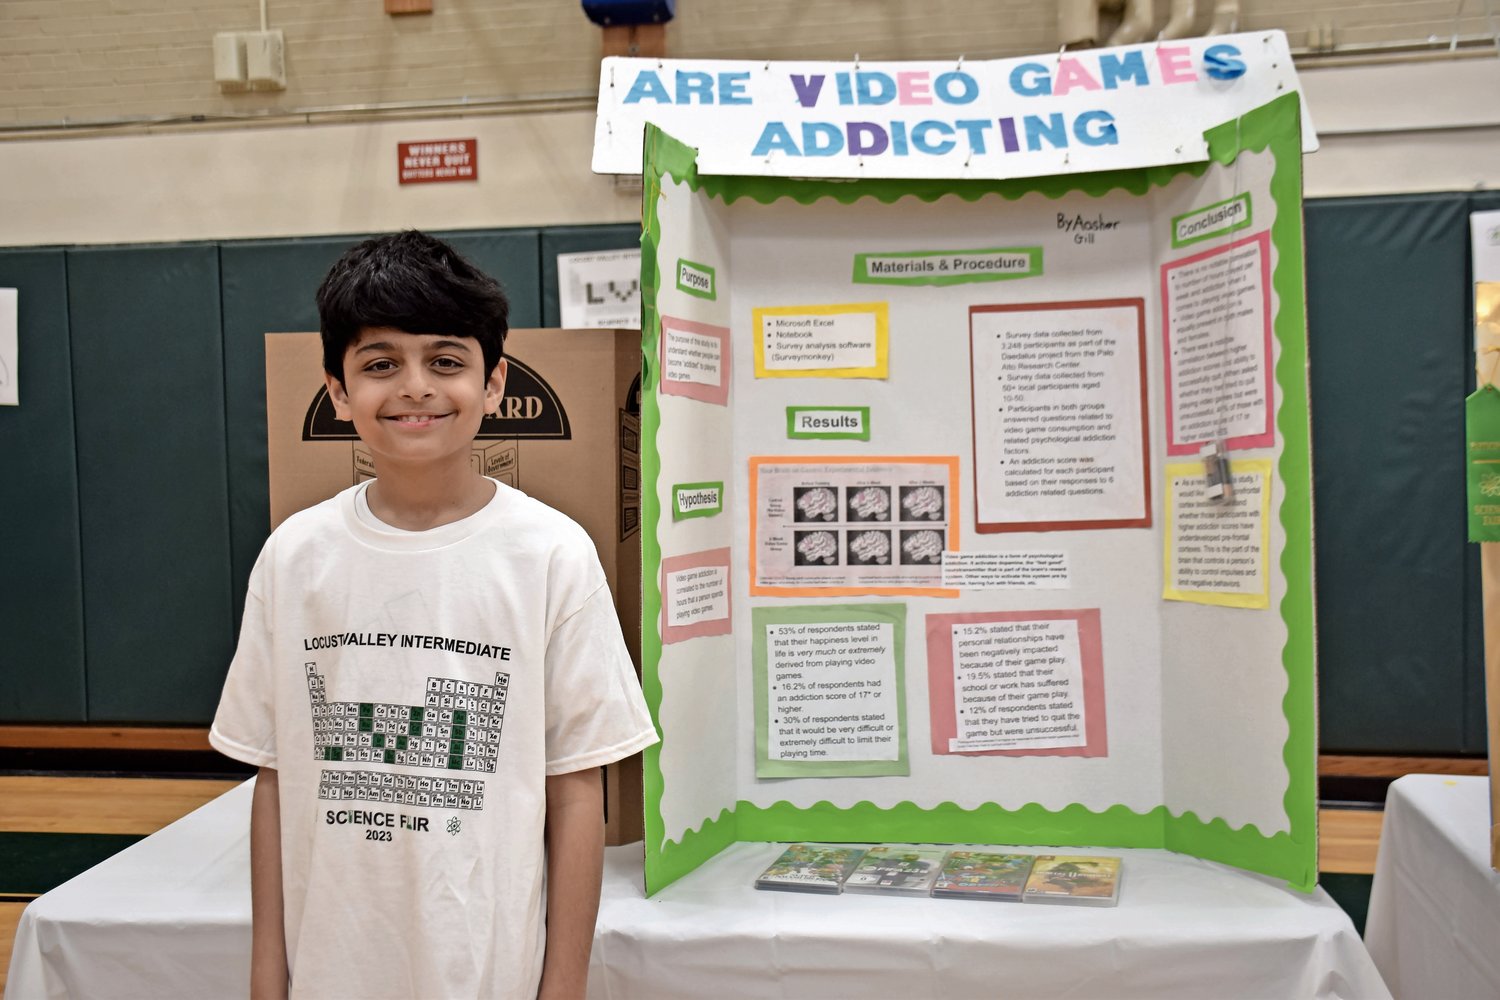 Fifth-grader Aasher Gill won first place in his grade with his project on the addictiveness of video games.